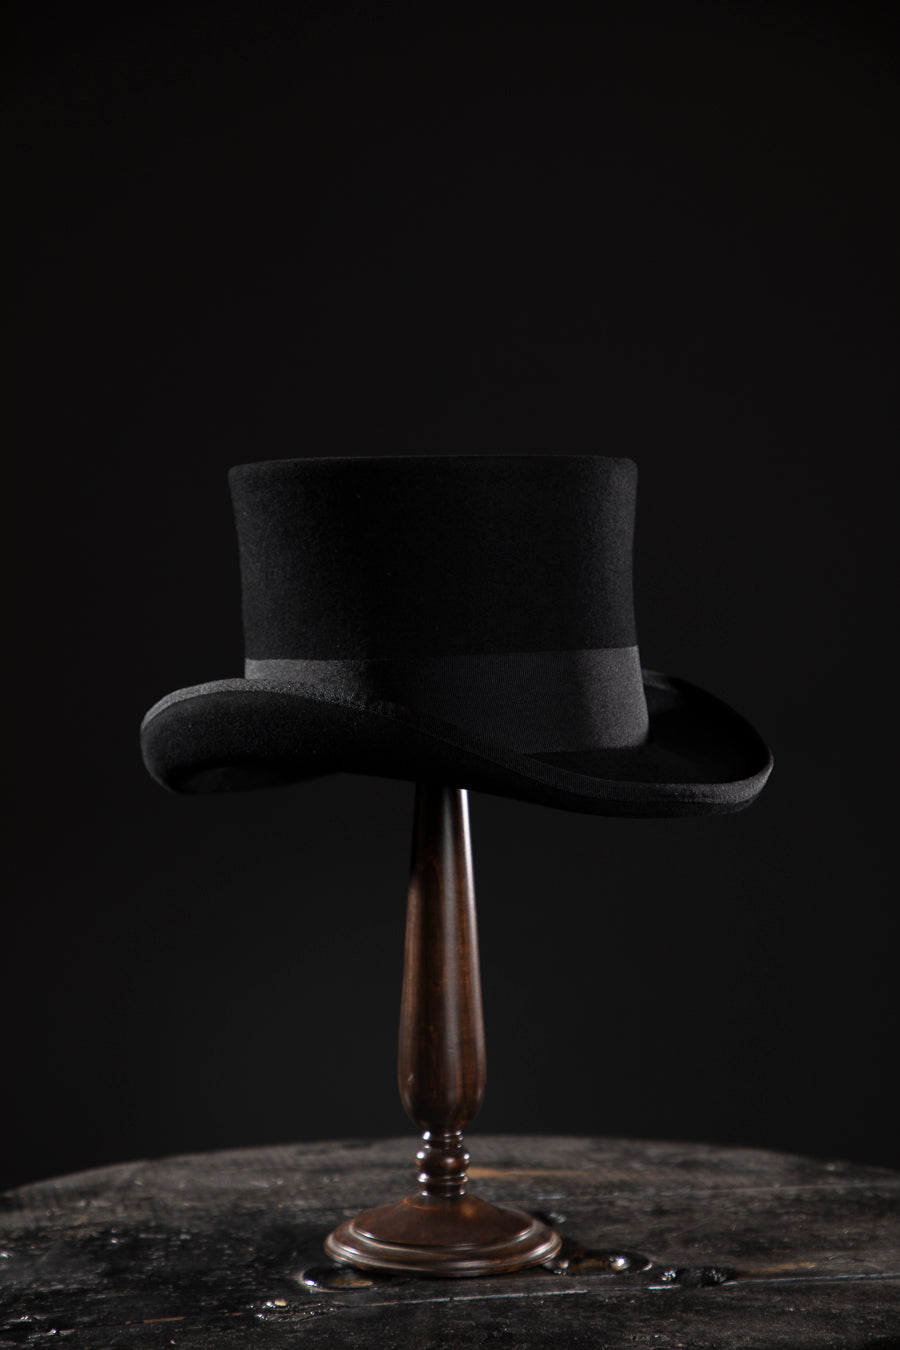 Wool Felt Top Hat - Deluxe, high quality hats for men and women. Our collection of hats including wool felt top hats, fedoras, bowlers, caps, fedoras, trilbys, cloches and more are a wonderful addition to a 1920s Gangster or Gatsby costume, or the perfect fashion accessory. Shop online, or visit our Mornington hat store to see all that we have to offer. 